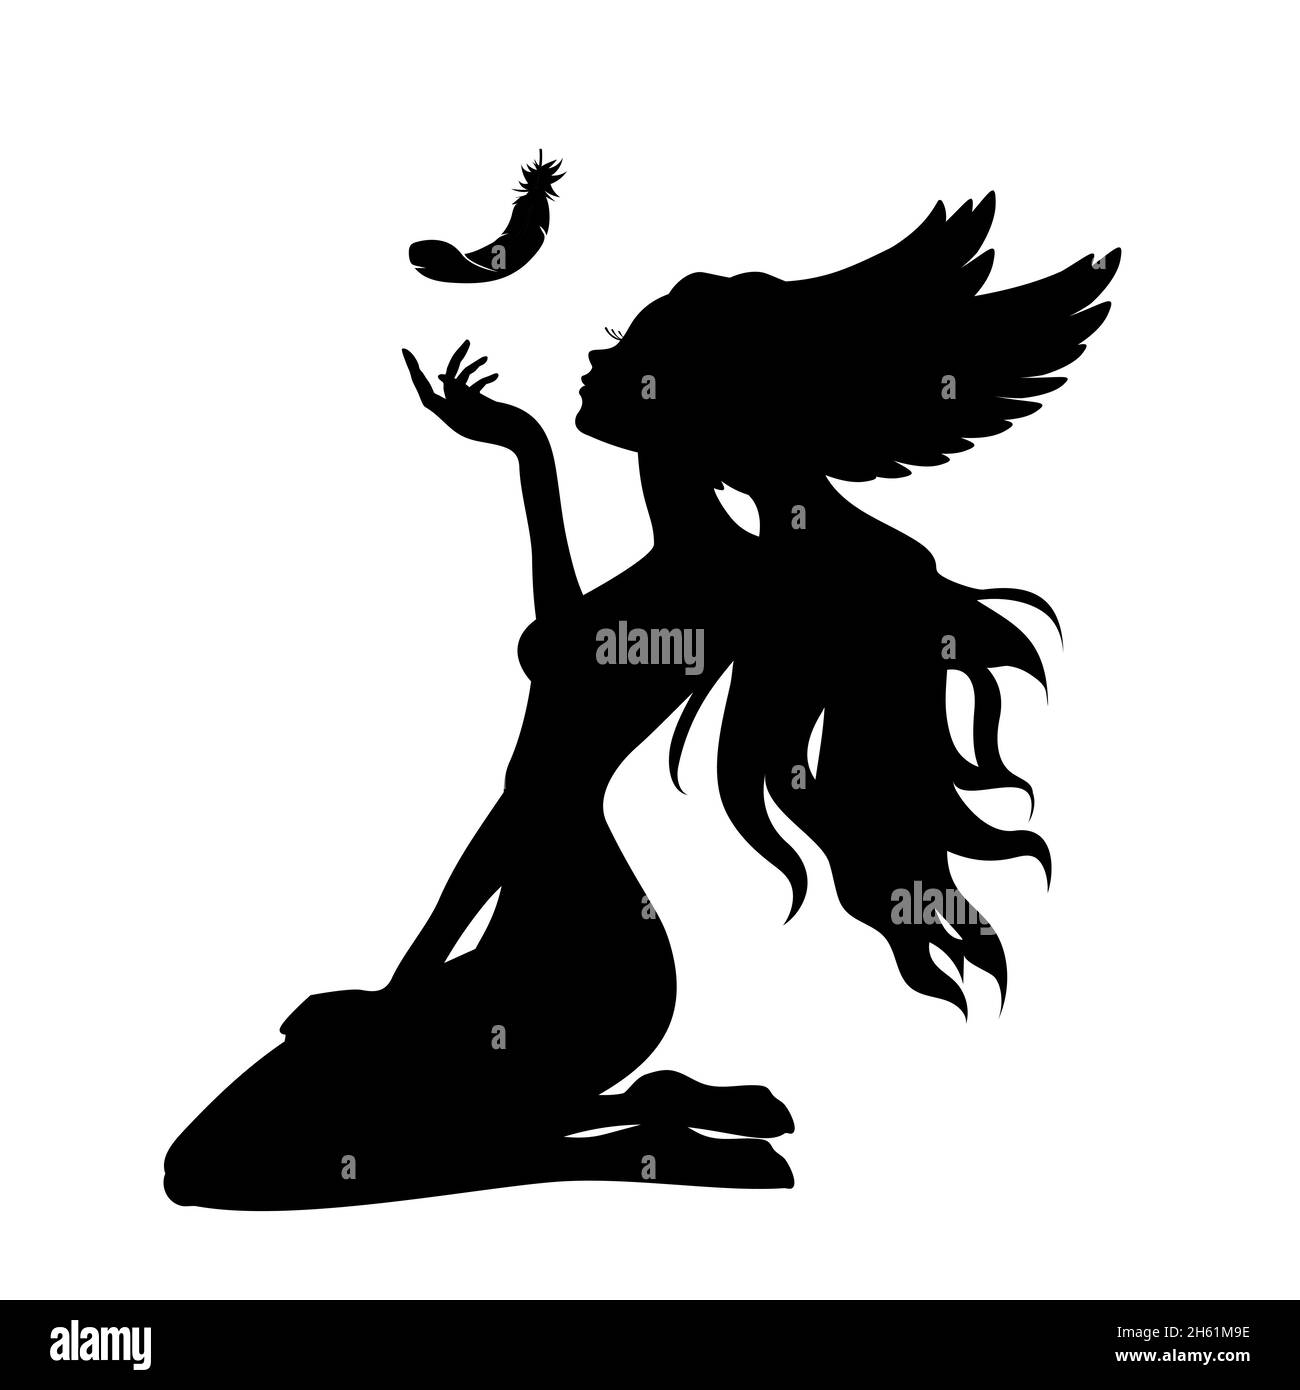 Silhouette of a girl with wings and a feather. Stock Vector